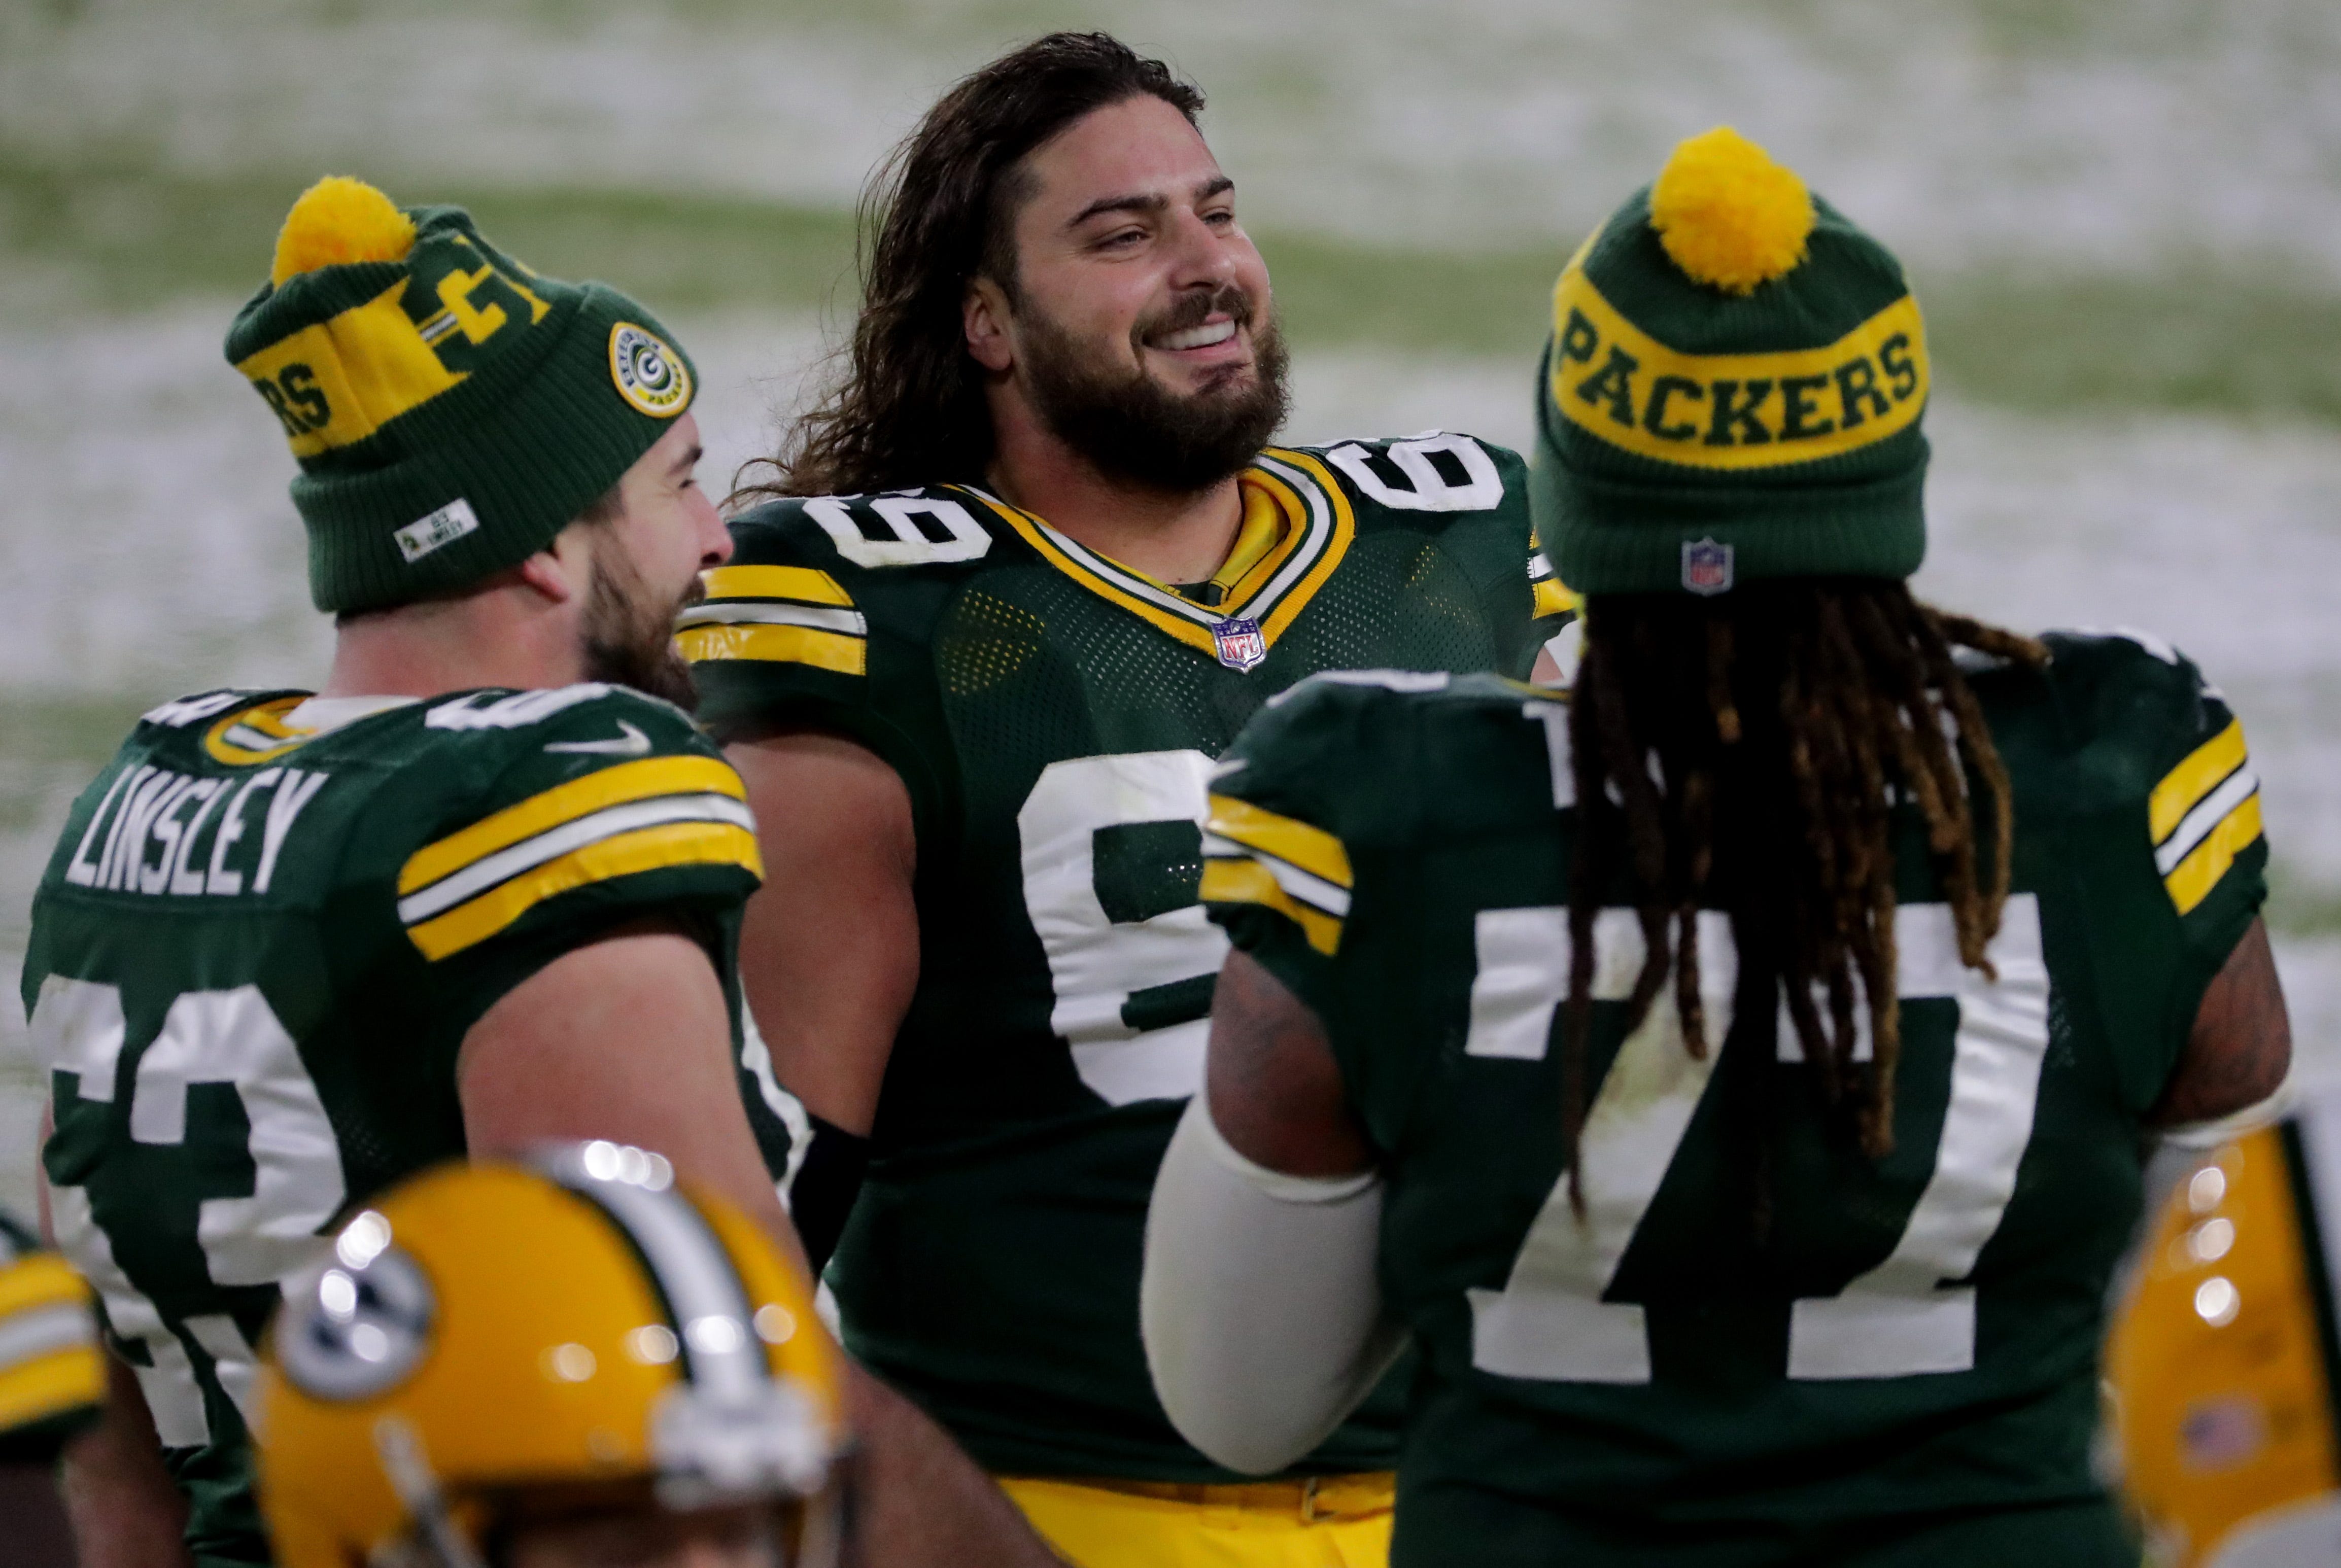 Green Bay Packers offensive tackle David Bakhtiari (69) is all smiles during the waning moments of the fourth quarter of their game Sunday, December 27, 2020 at Lambeau Field in Green Bay, Wis. The Green Bay Packers beat the Tennessee Titans 40-14.